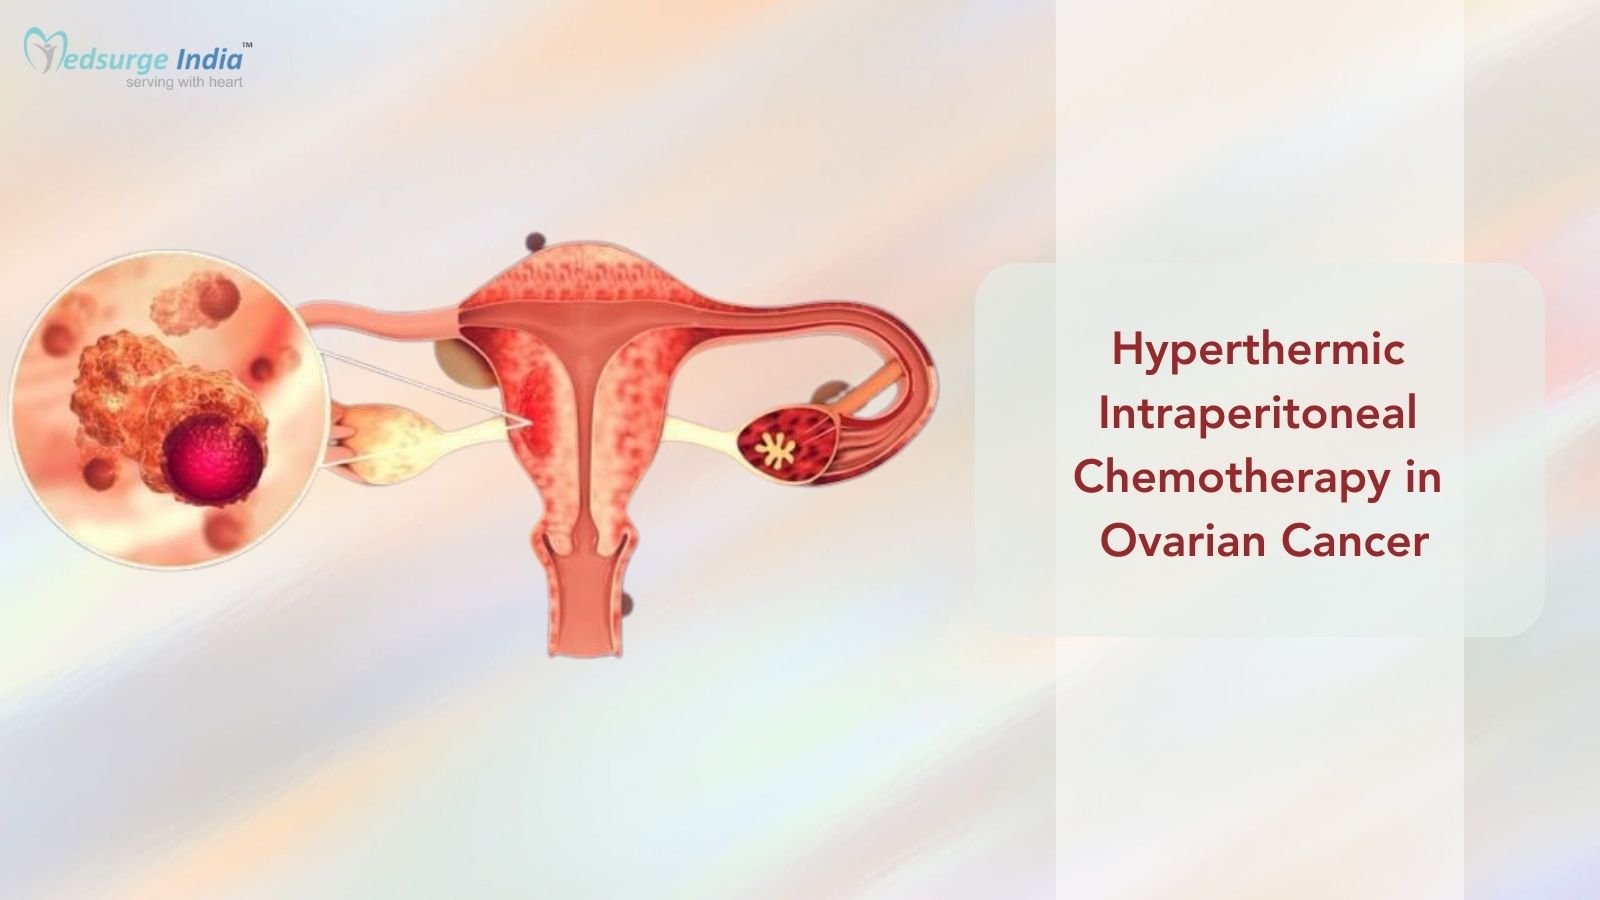 Hyperthermic Intraperitoneal Chemotherapy in Ovarian Cancer